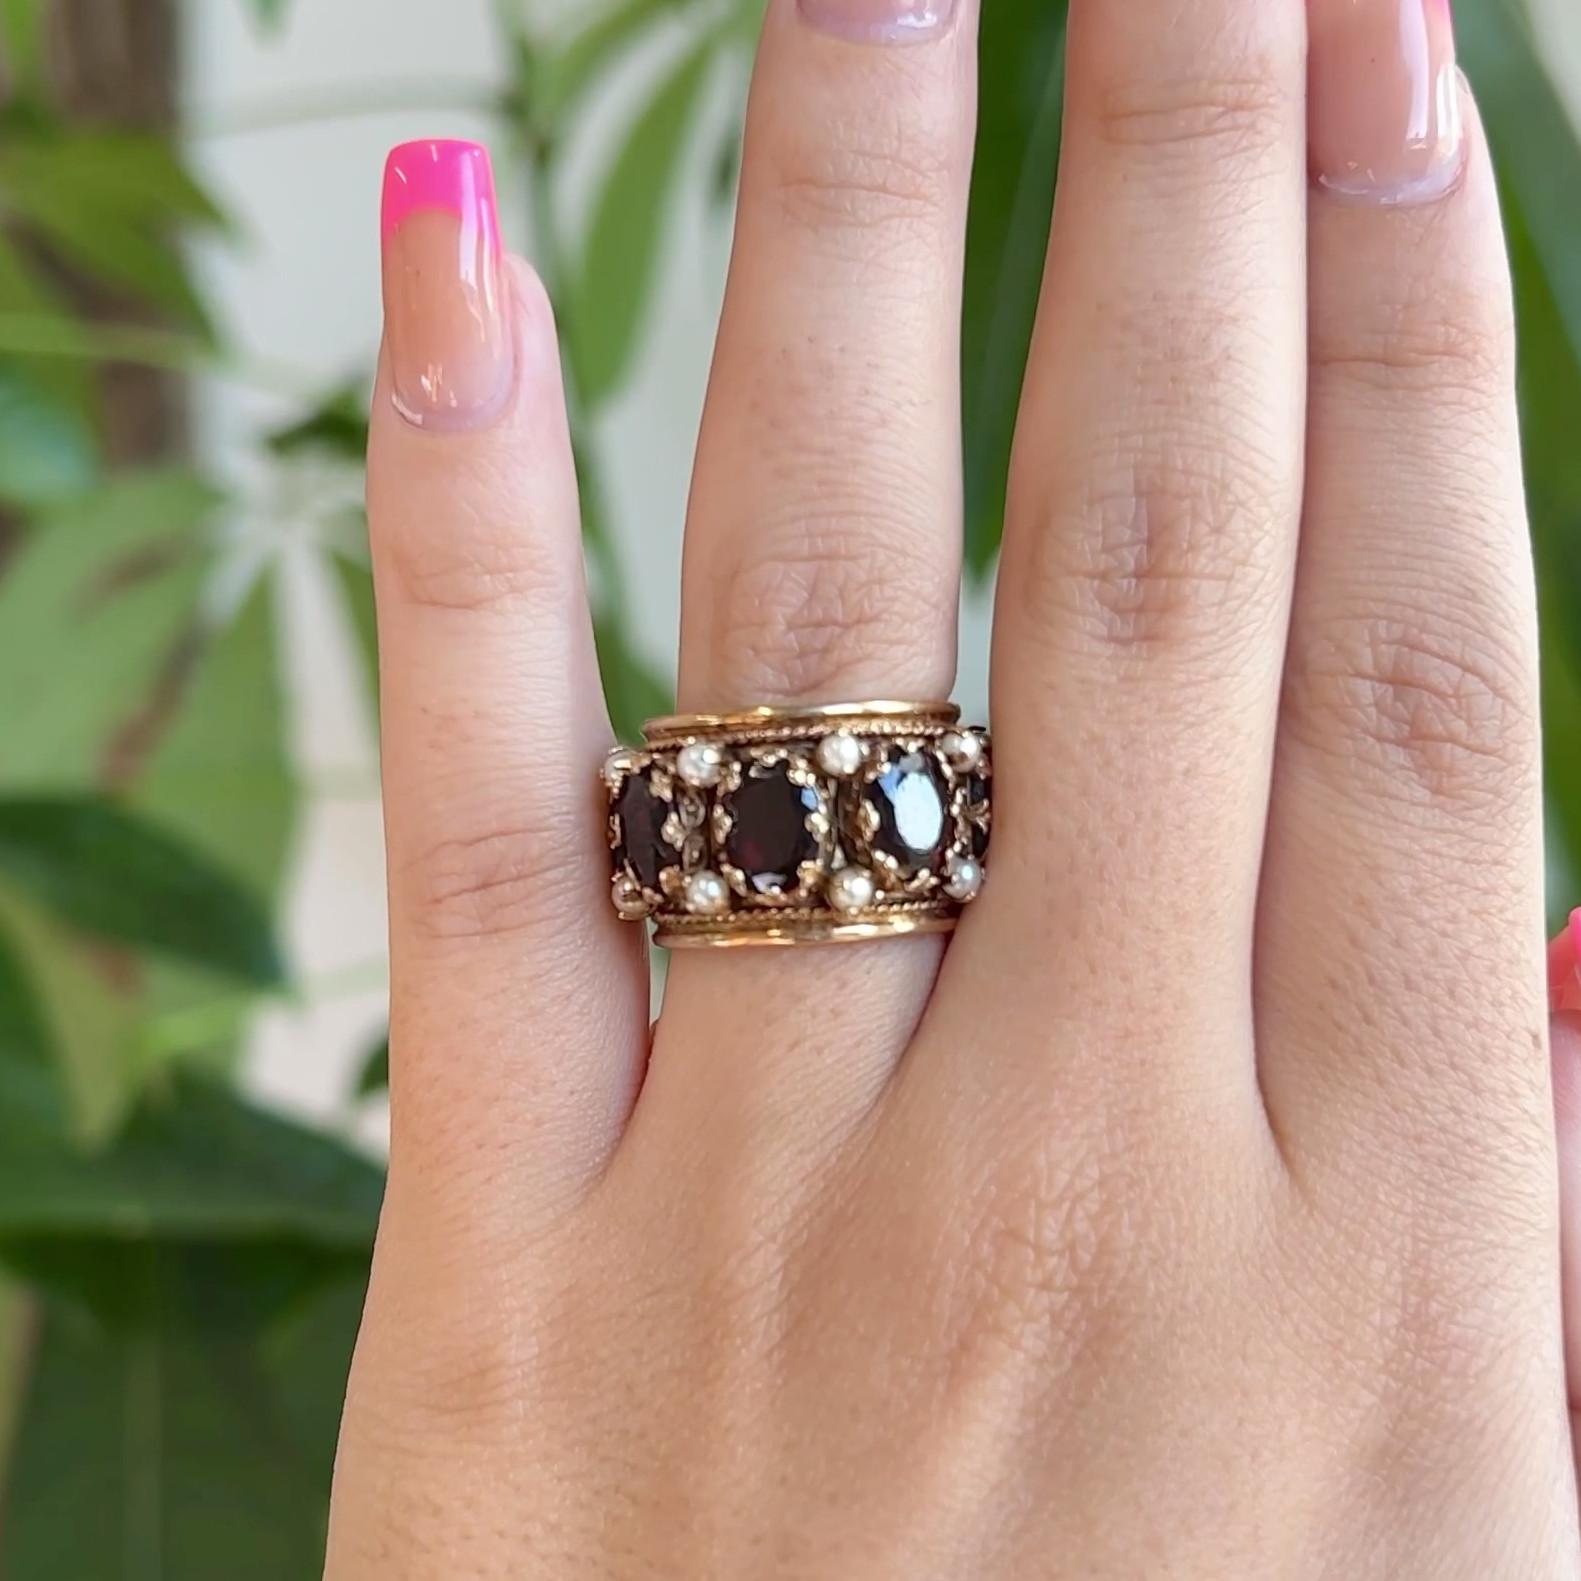 One Vintage Renaissance Inspired Garnet Pearl Yellow Gold Thick Band. Featuring eight oval mixed cut garnets with a total weight of approximately 10.00 carats. Accented by 16 pearls. Crafted in yellow gold with purity marks. Engraving inside band